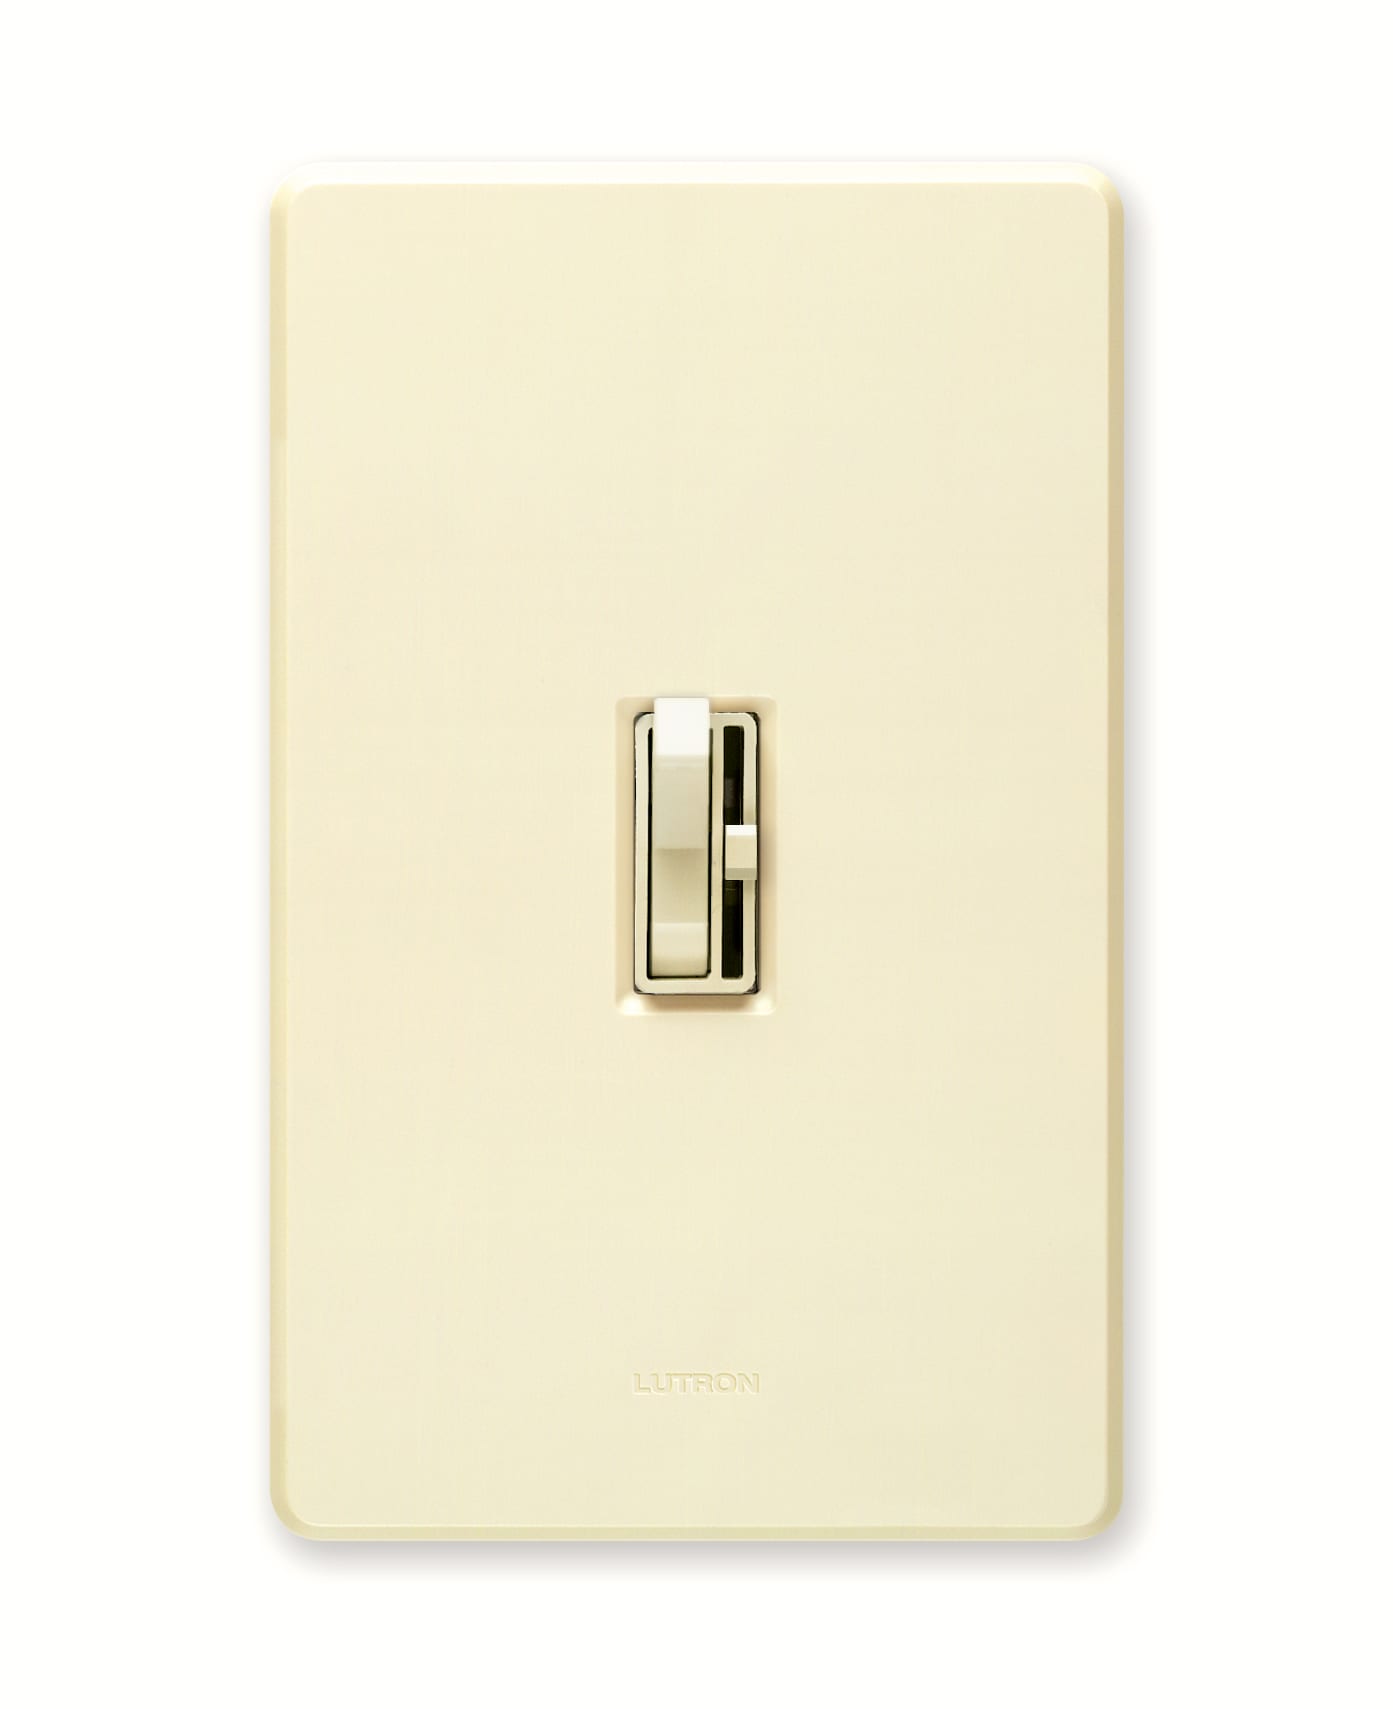 Lutron Toggler Incandescent Single-pole Toggle Light Dimmer Switch, Almond  in the Light Dimmers department at